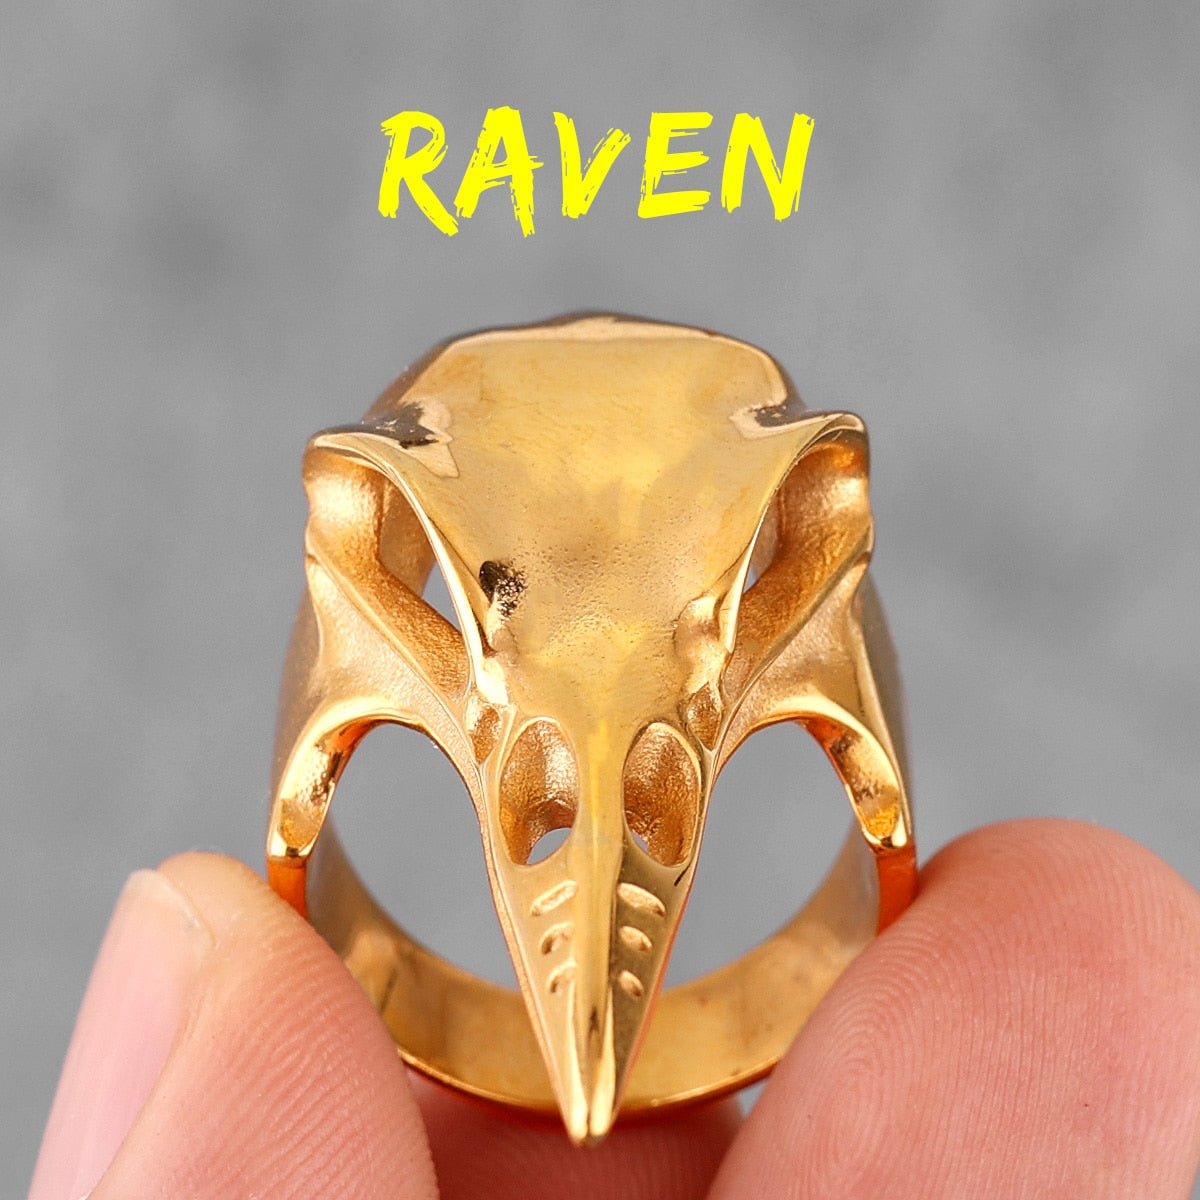 Viking Crow Skull Stainless Steel Mens Rings Punk Amulet Gothic for Male Boyfriend Biker Jewelry Creativity Gift R705-Gold